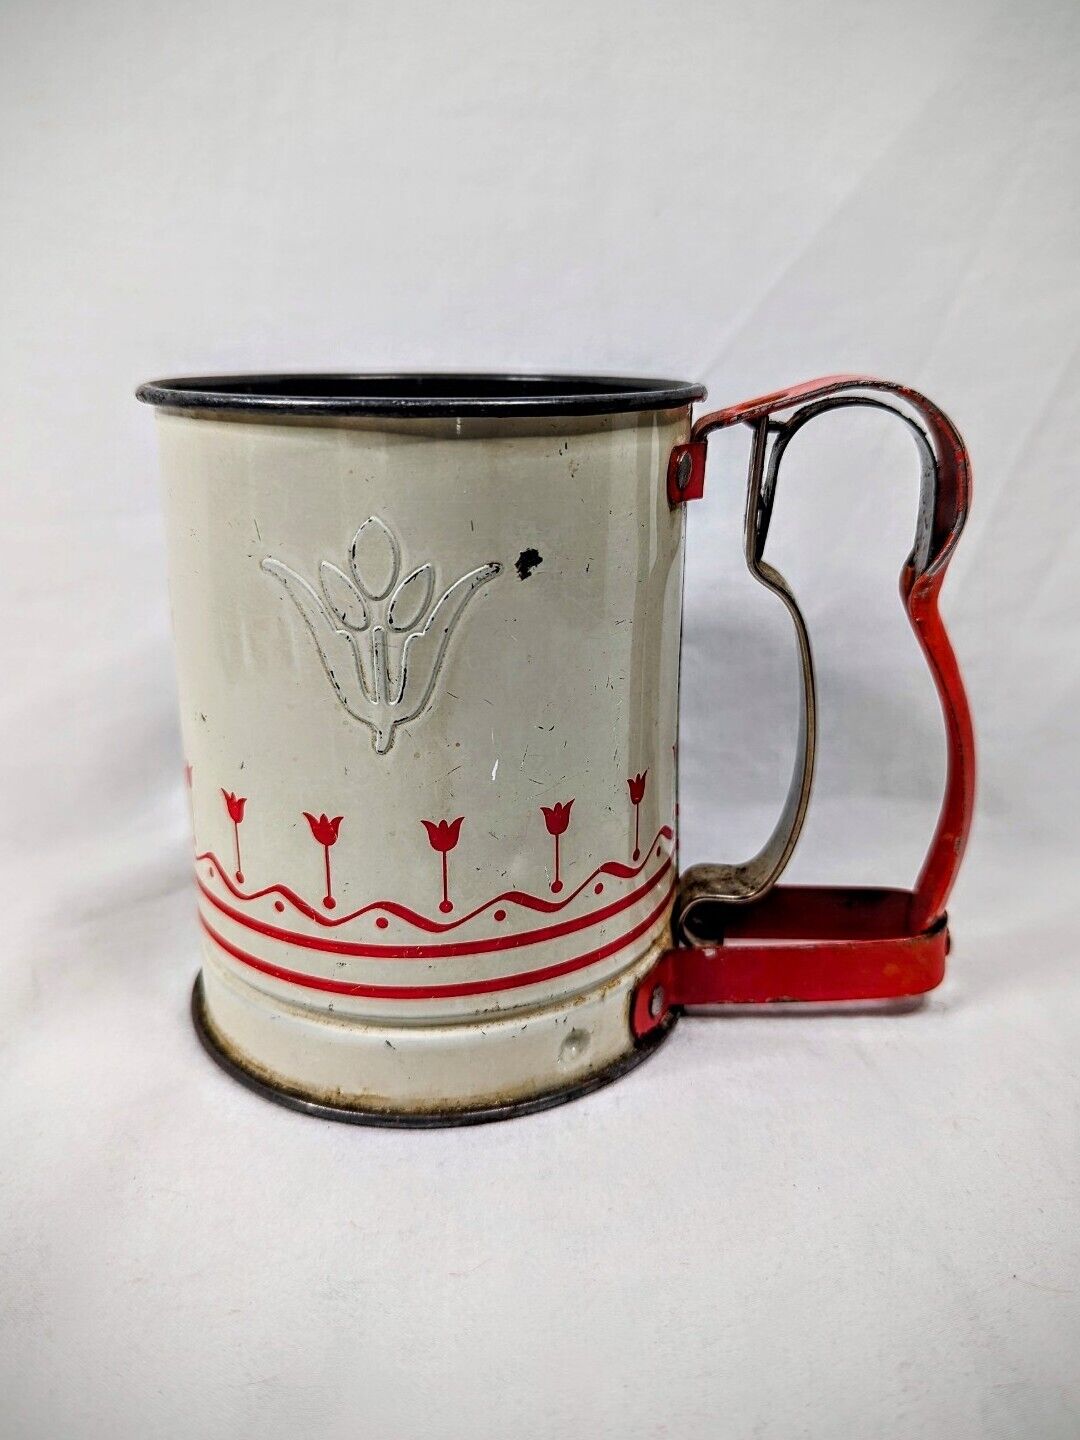 Androck Vintage Country Baking Sifter Handi-Sift Jr. Red White Tulip Tin Kitchen